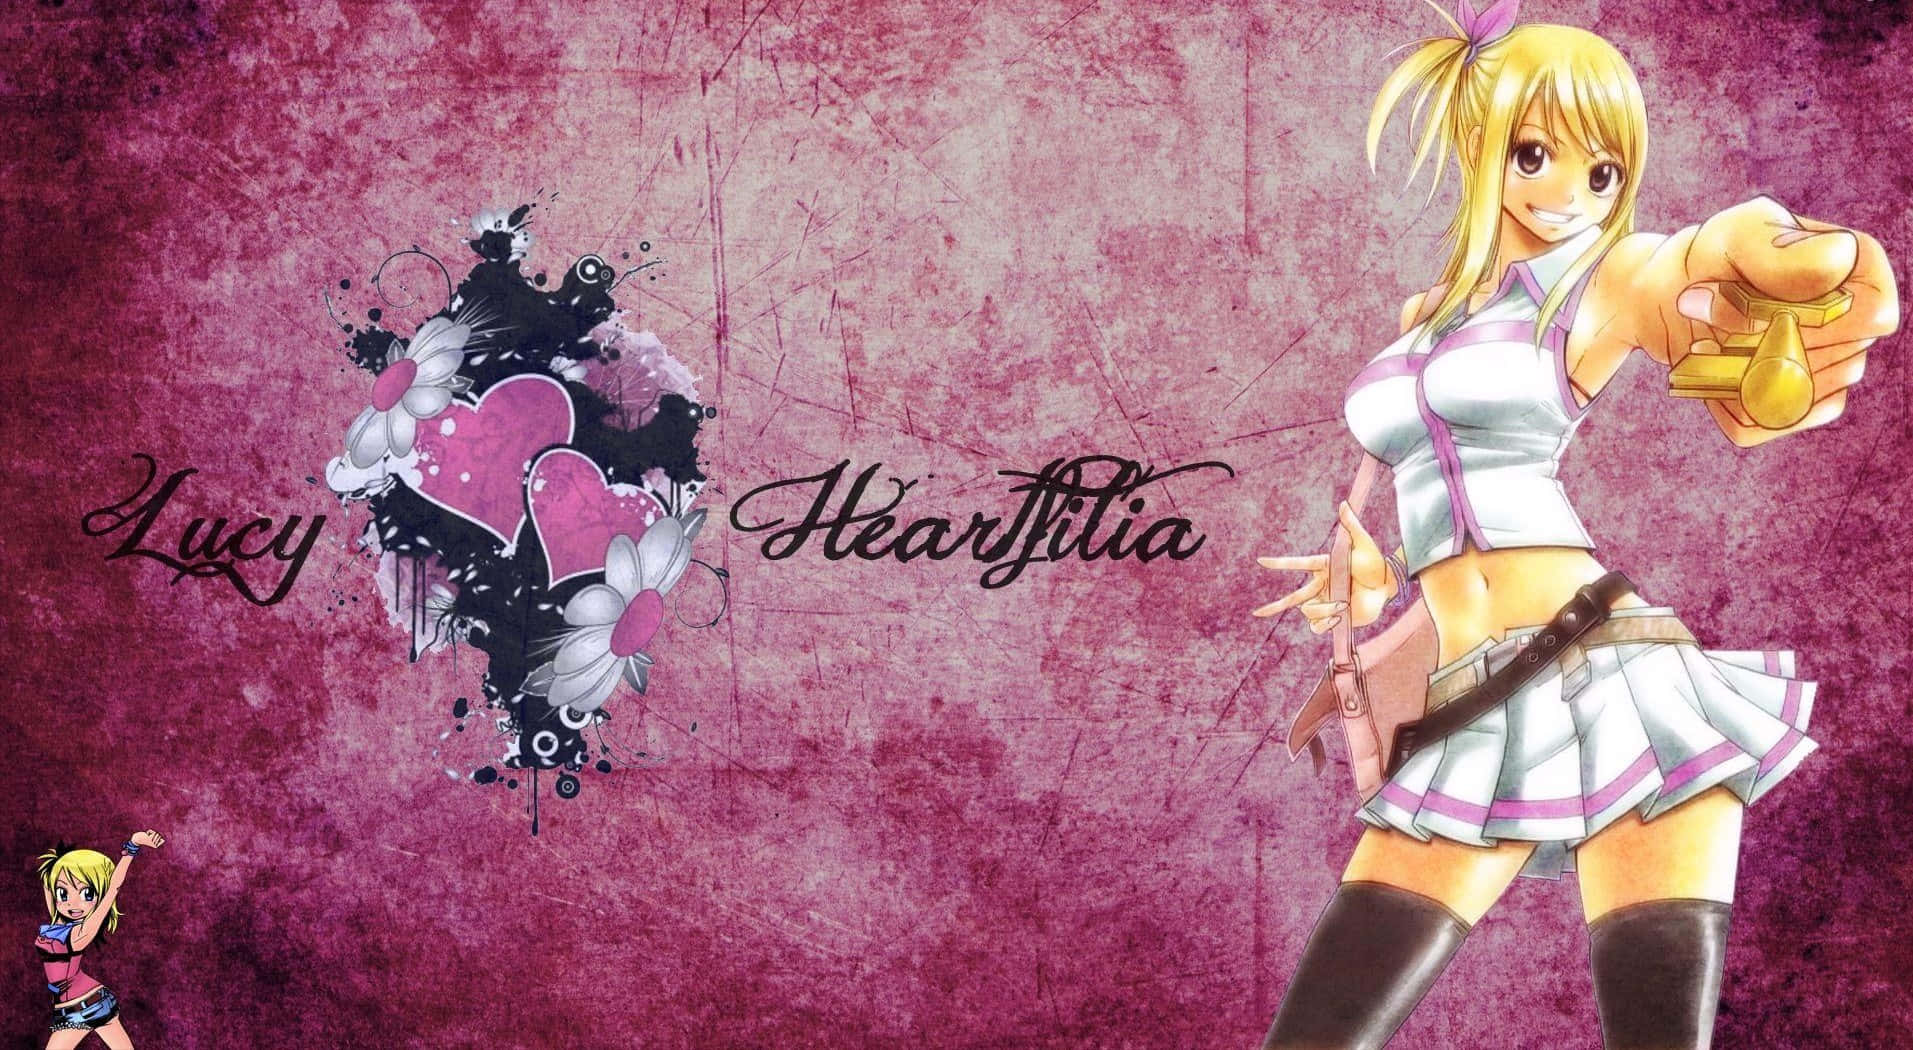 Stunning Lucy Heartfilia In Action Background